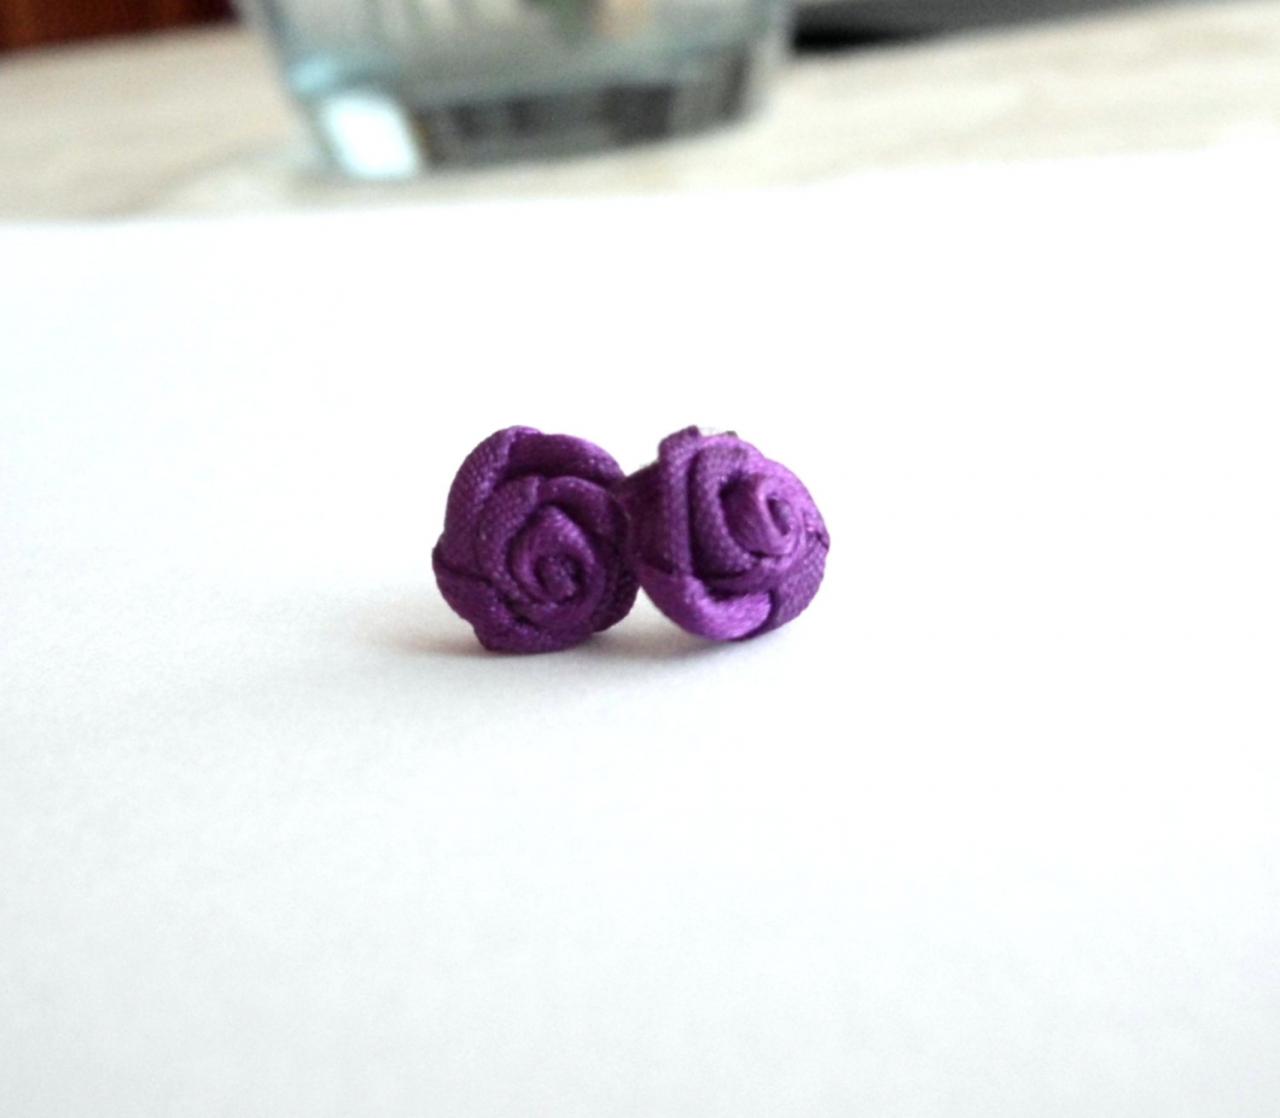 Violet Earrings Made Of Repurposed Applique Flowers, Textile Jewelry, Purple Rose Earrings, Recycled Fabric Studs